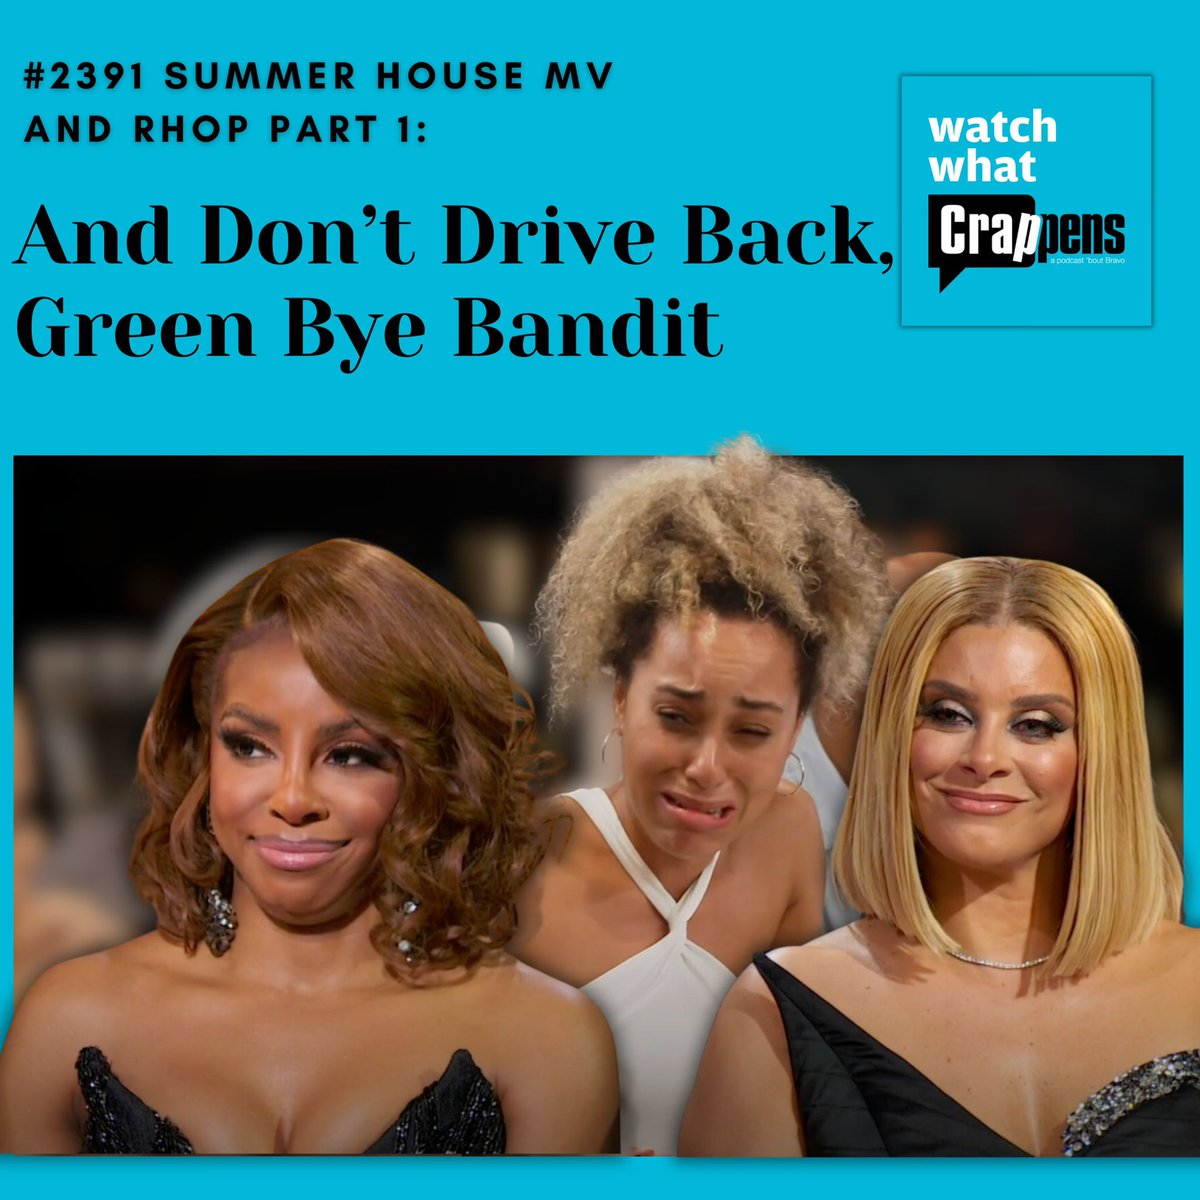 New epi! We open with a talk about #SummerHouseMV and #RHOP ends its season with a final reunion episode by forcing the ladies to eat carbs on camera. Have we lost all respect? It’s the last epi for both Robyn & Candiace, so fold up some poster board and let’s have a good cry